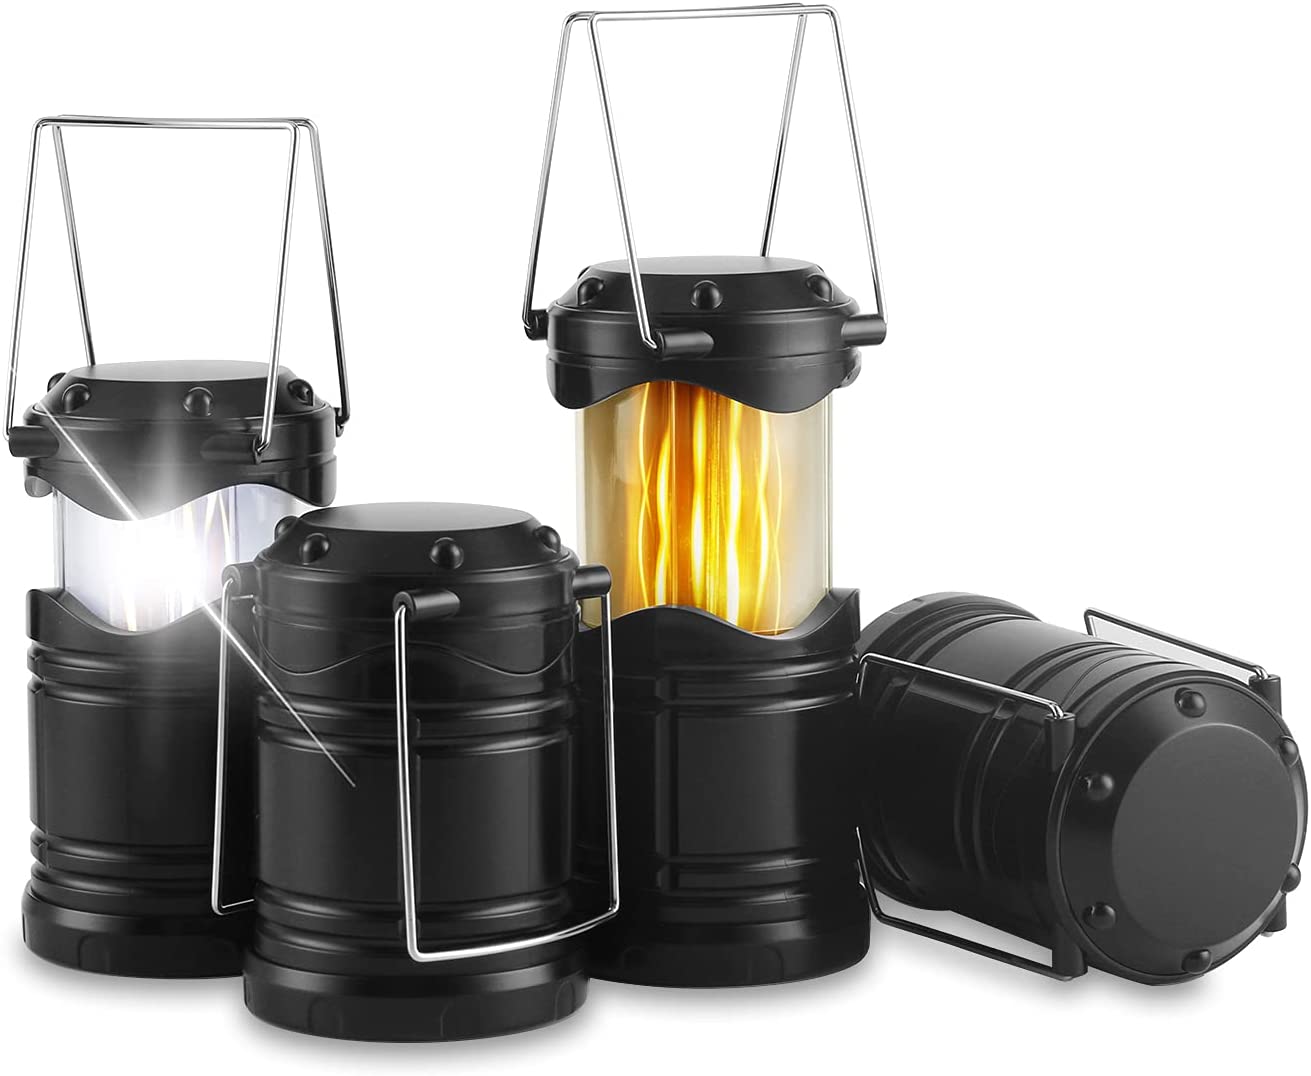 Black Battery Powered Camping Lights Super Bright Collapsible Flashlight Portable Emergency Supplies Kit Dual Mode Lichamp 4 Pack LED Camping Lanterns